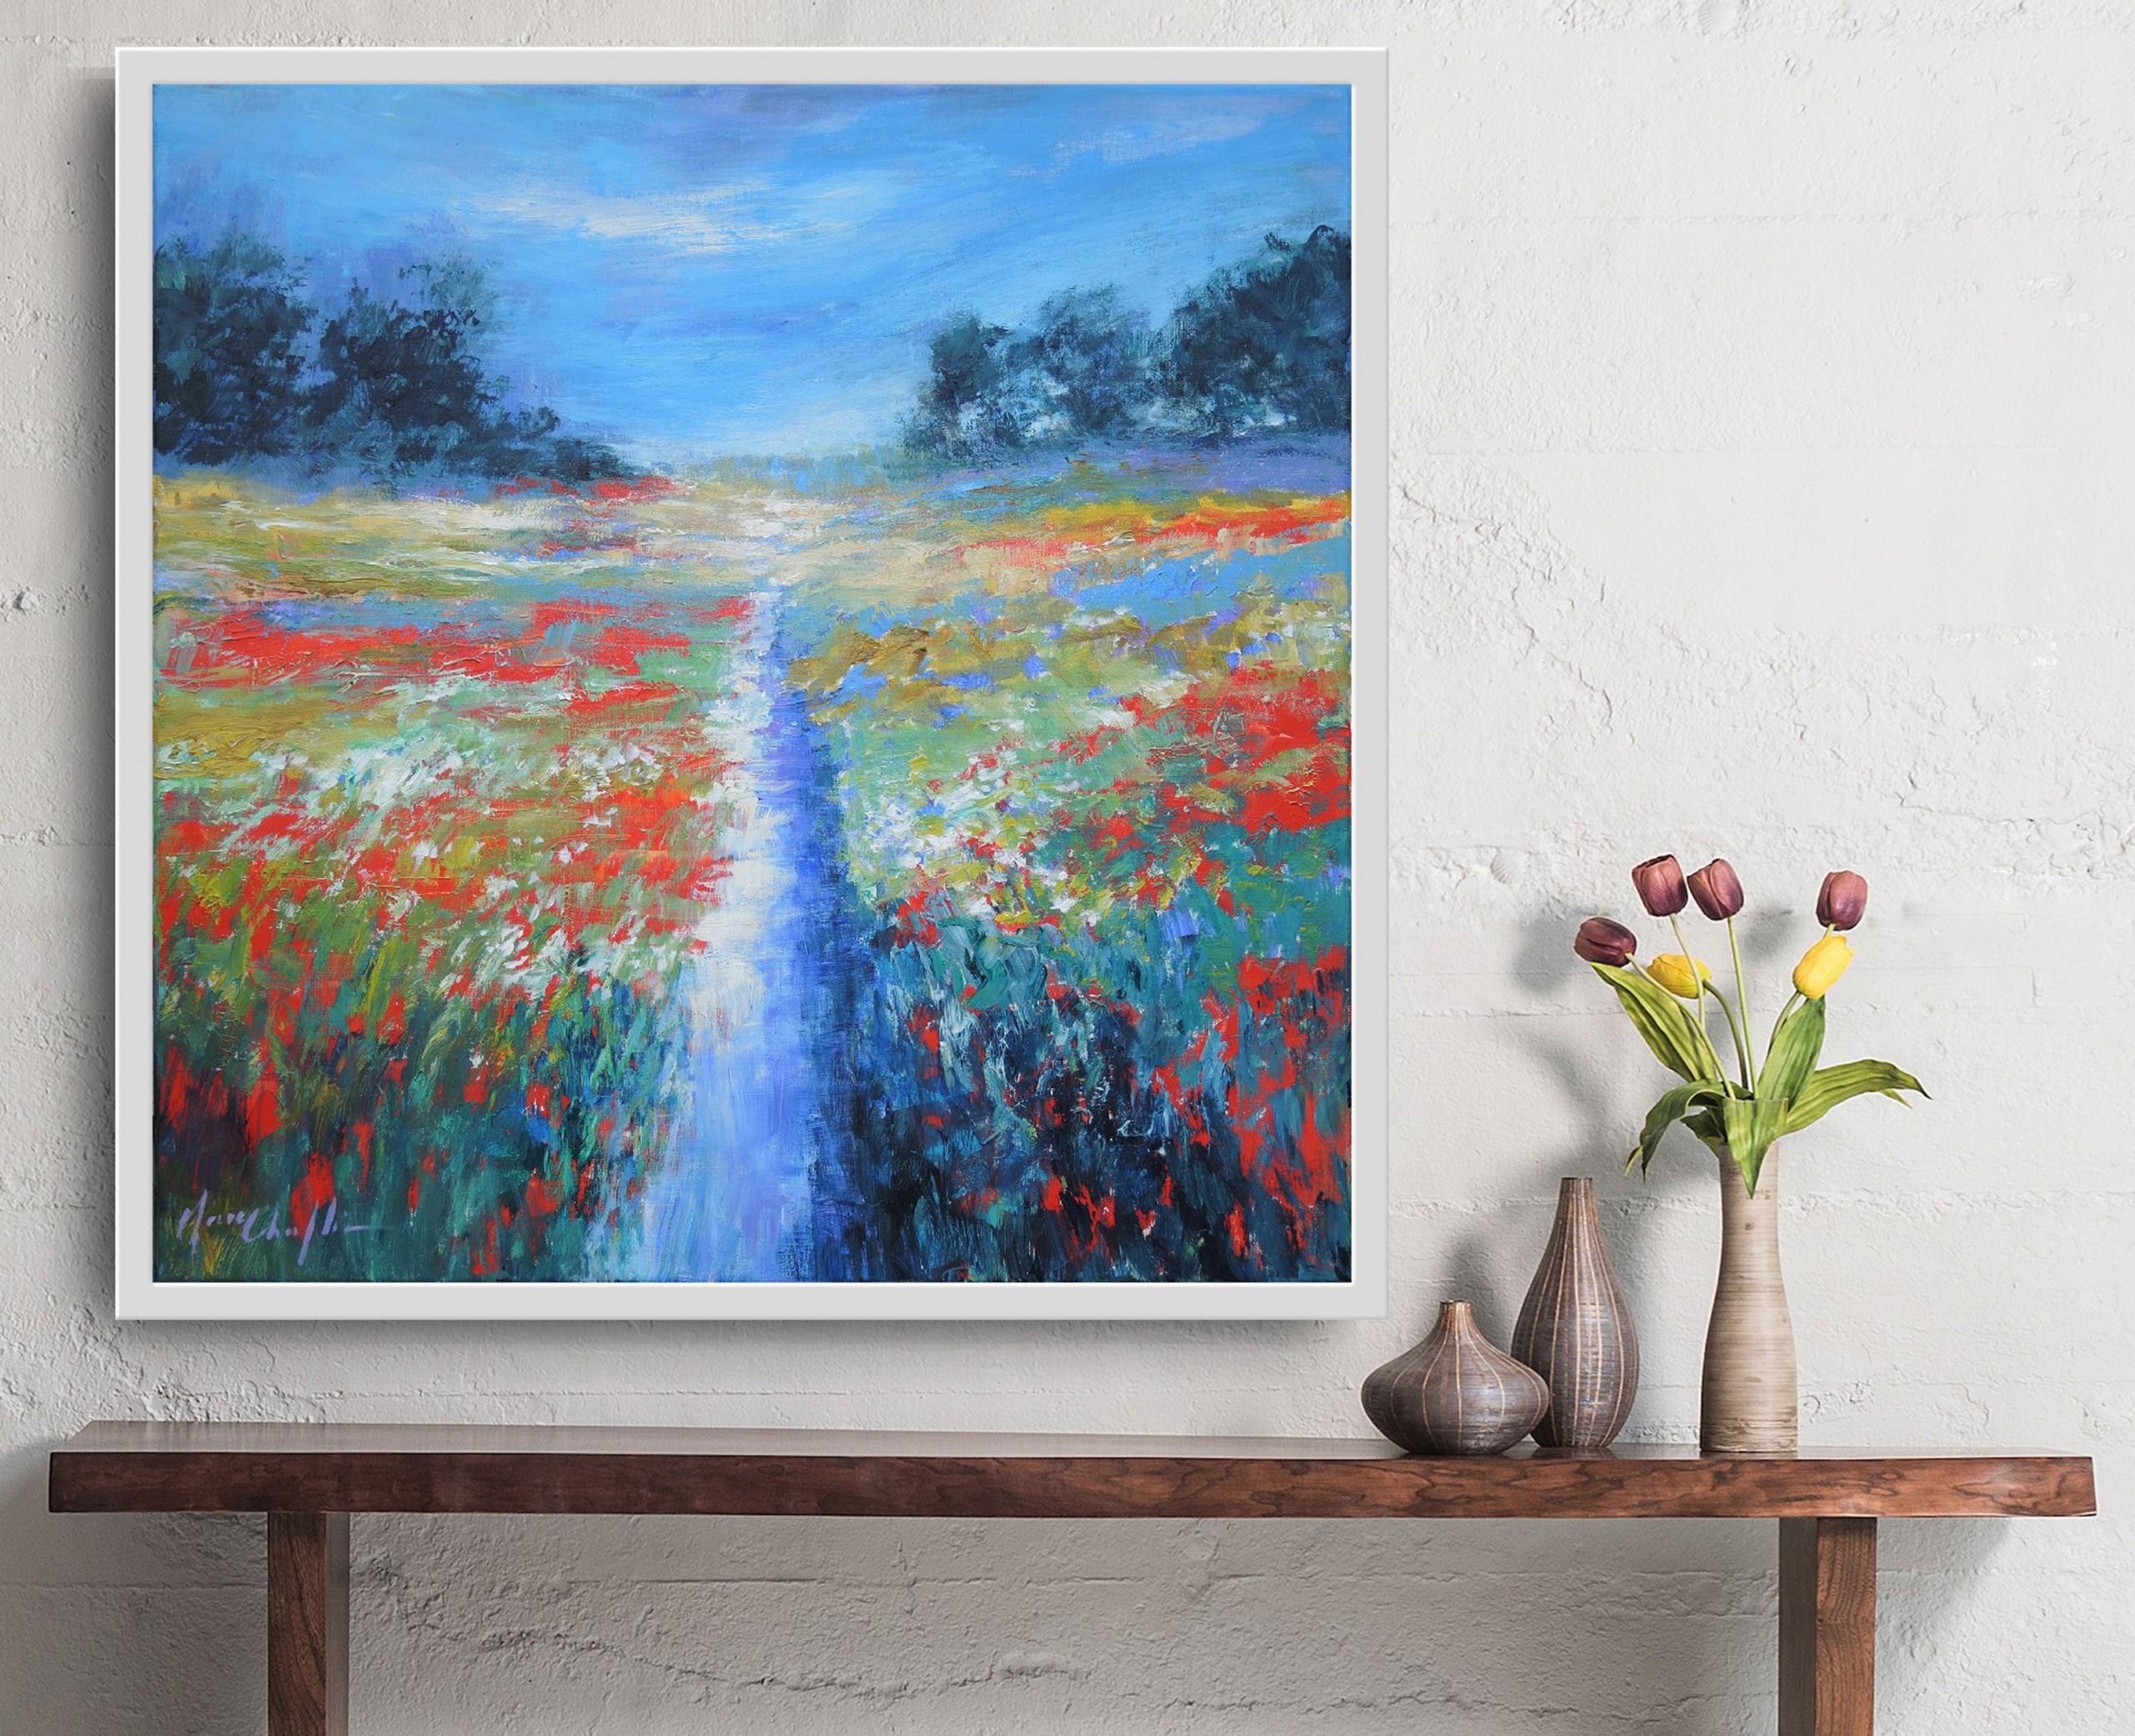 A walk up the hill by Mary Chaplin [2022]

original
acrylic
Image size: H:60 cm x W:60 cm
Complete Size of Unframed Work: H:60 cm x W:60 cm x D:2cm
Sold Unframed
Please note that insitu images are purely an indication of how a piece may look

Mary